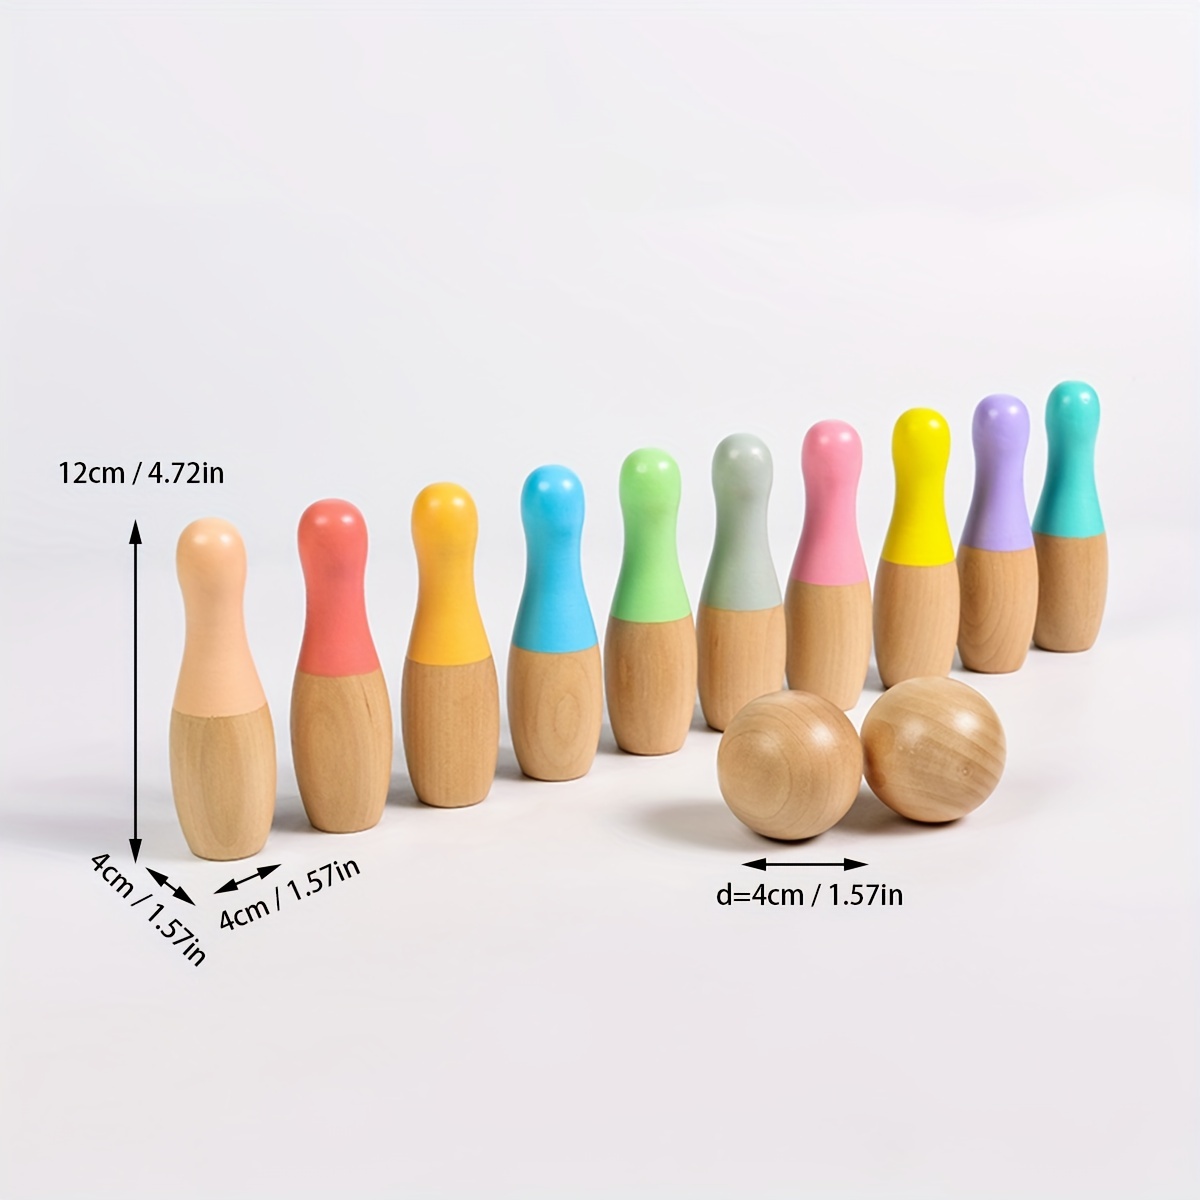 Realistic Wooden Desktop Bowling Game Toy - An Interactive Parent-child Toy For Boys and Girls!